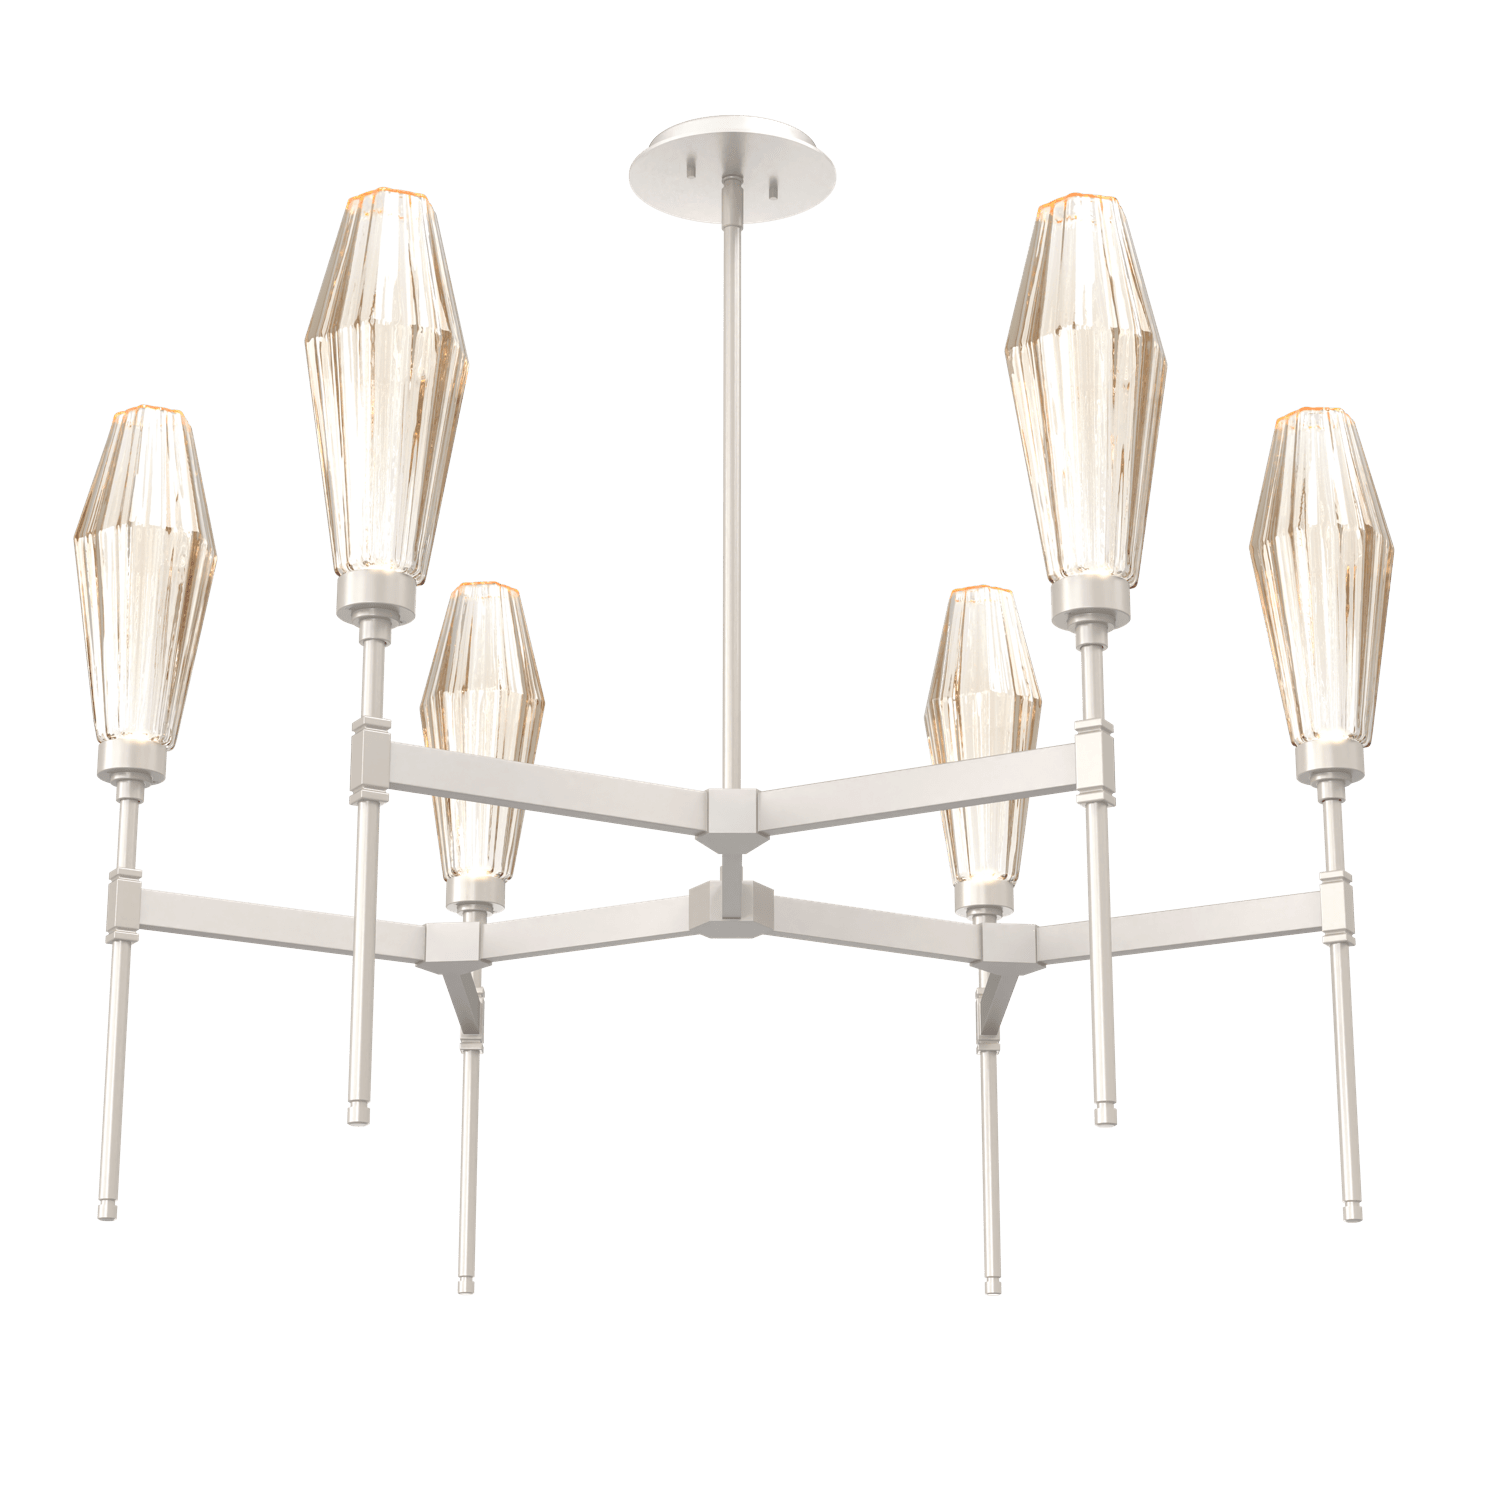 CHB0049-37-BS-RA-Hammerton-Studio-Aalto-37-inch-round-belvedere-chandelier-with-metallic-beige-silver-finish-and-optic-ribbed-amber-glass-shades-and-LED-lamping